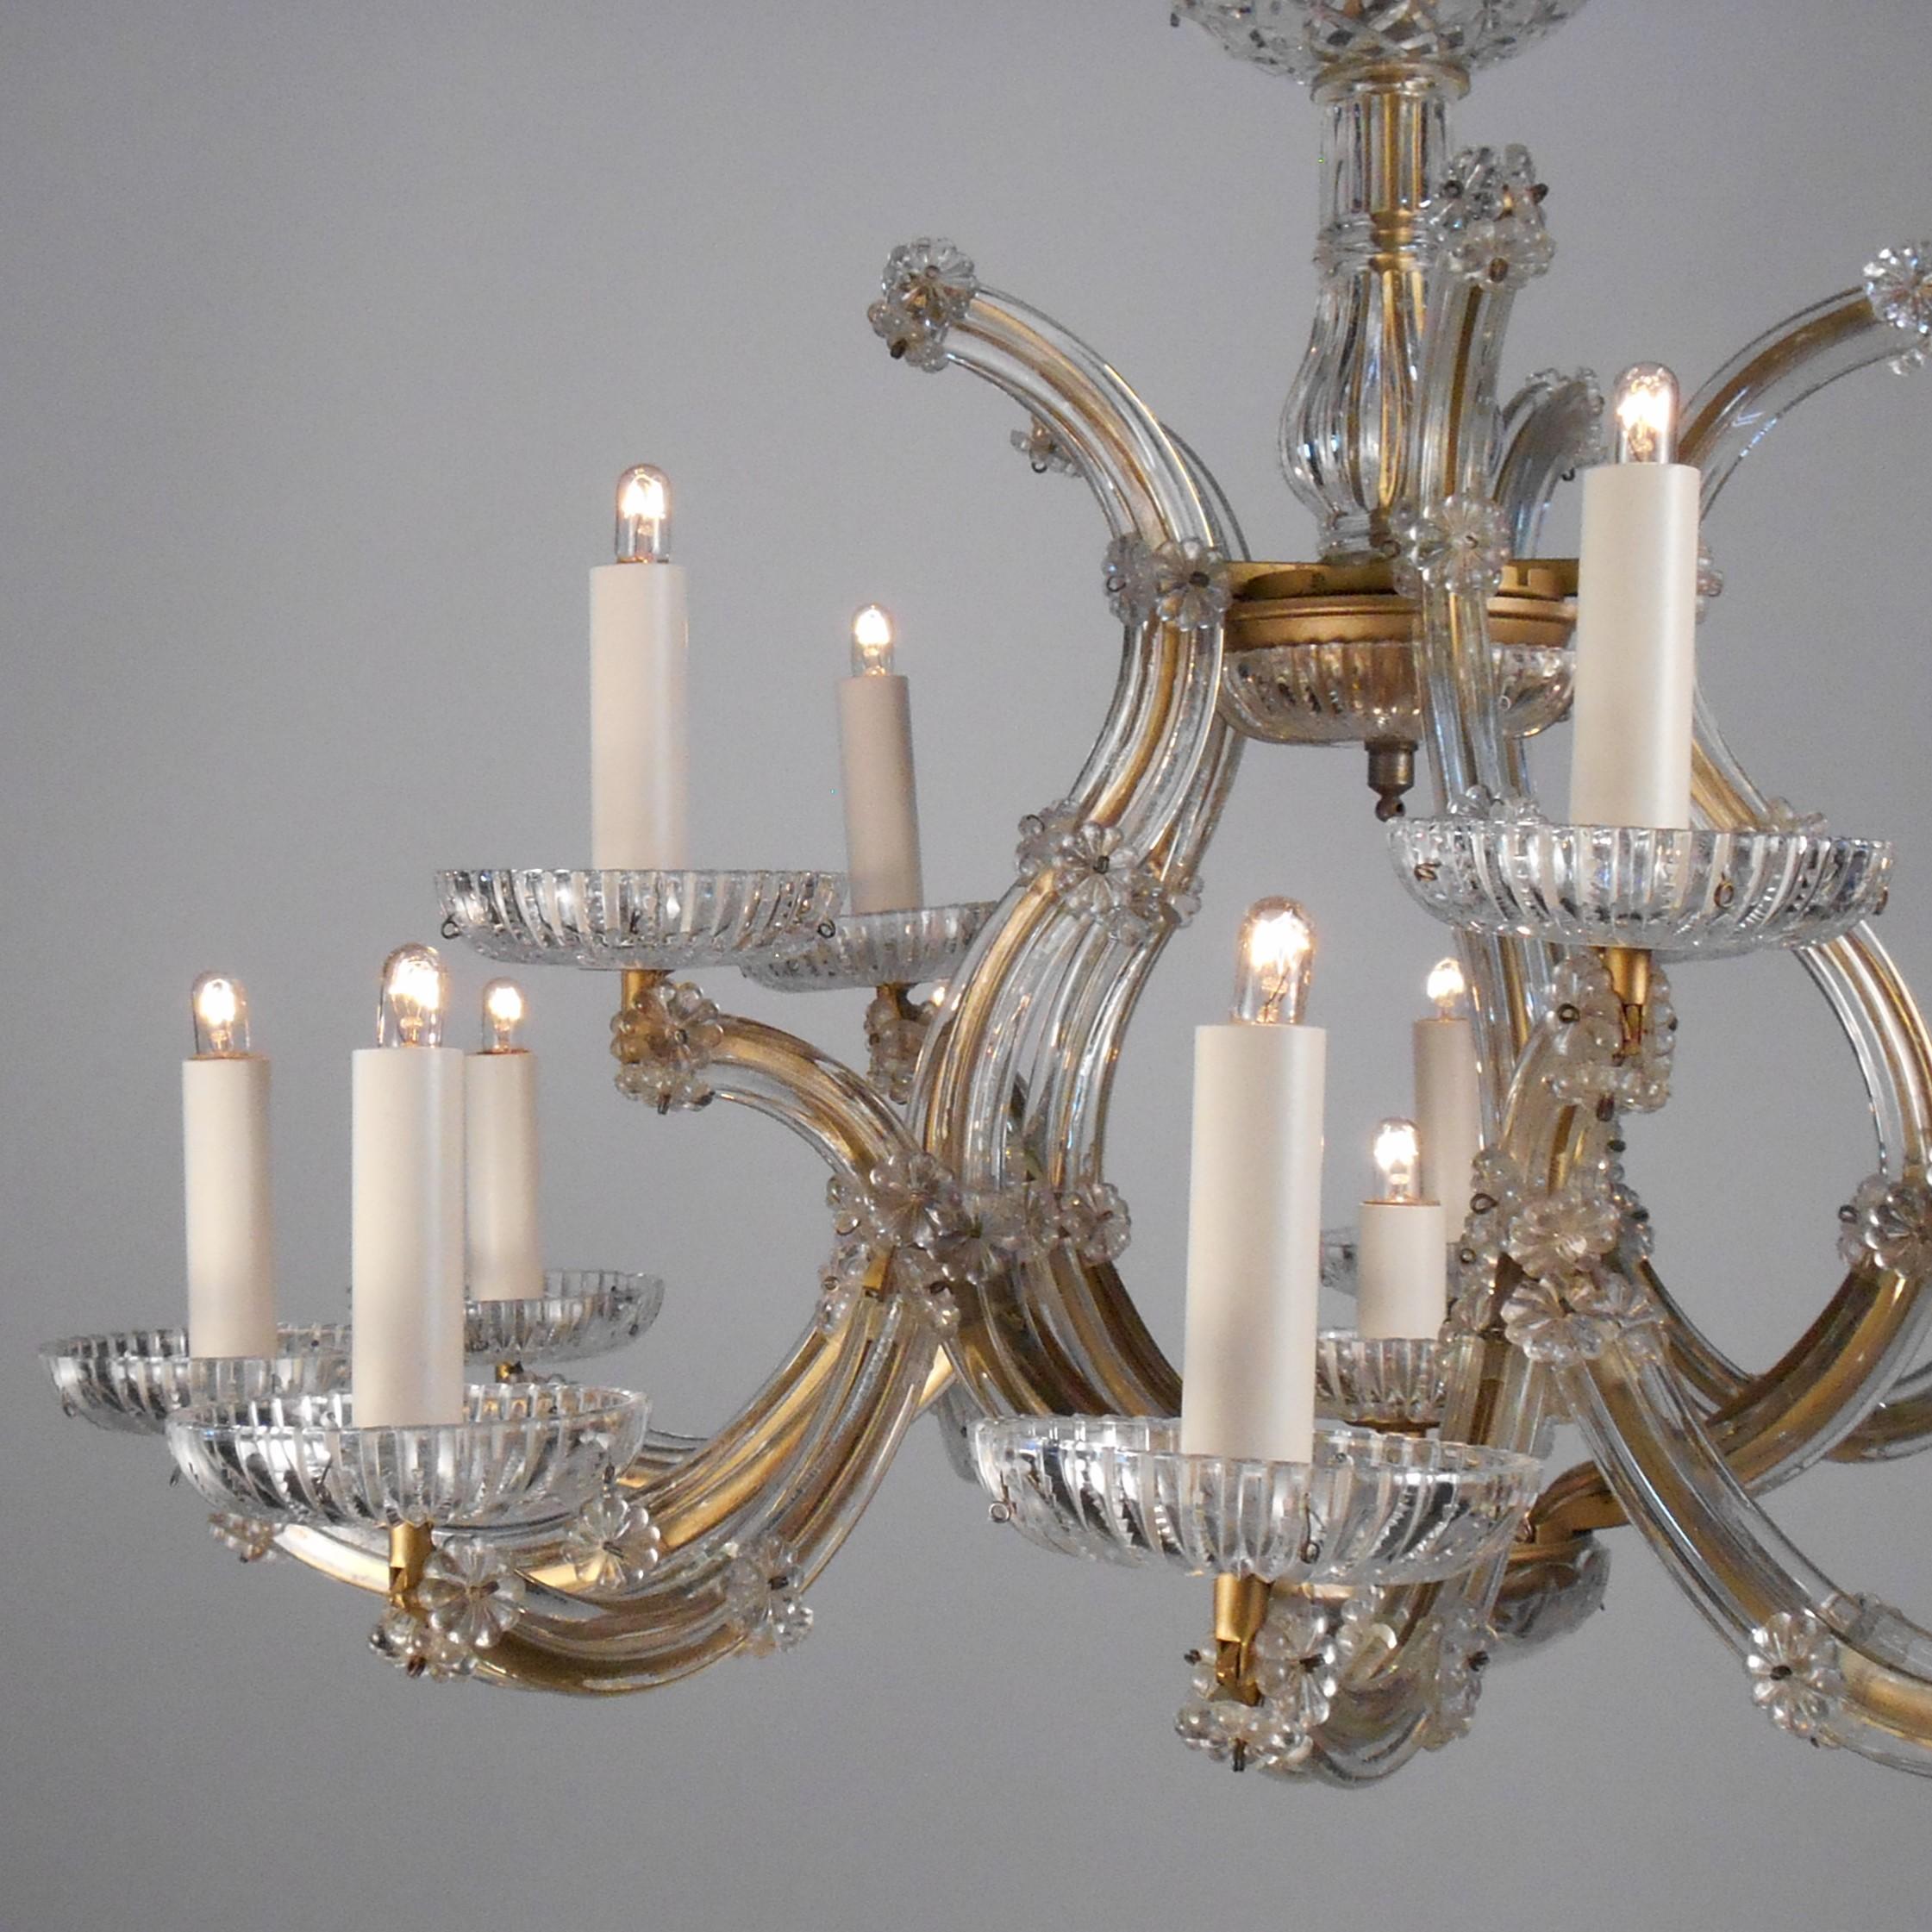 The Maria Theresa chandelier is very distinct, first appearing in Austria in the 18th century in the court of Marie Antoinette’s mother Maria Theresa. The distinctive metal frames are always faced with cut crystal glass and held in place with small